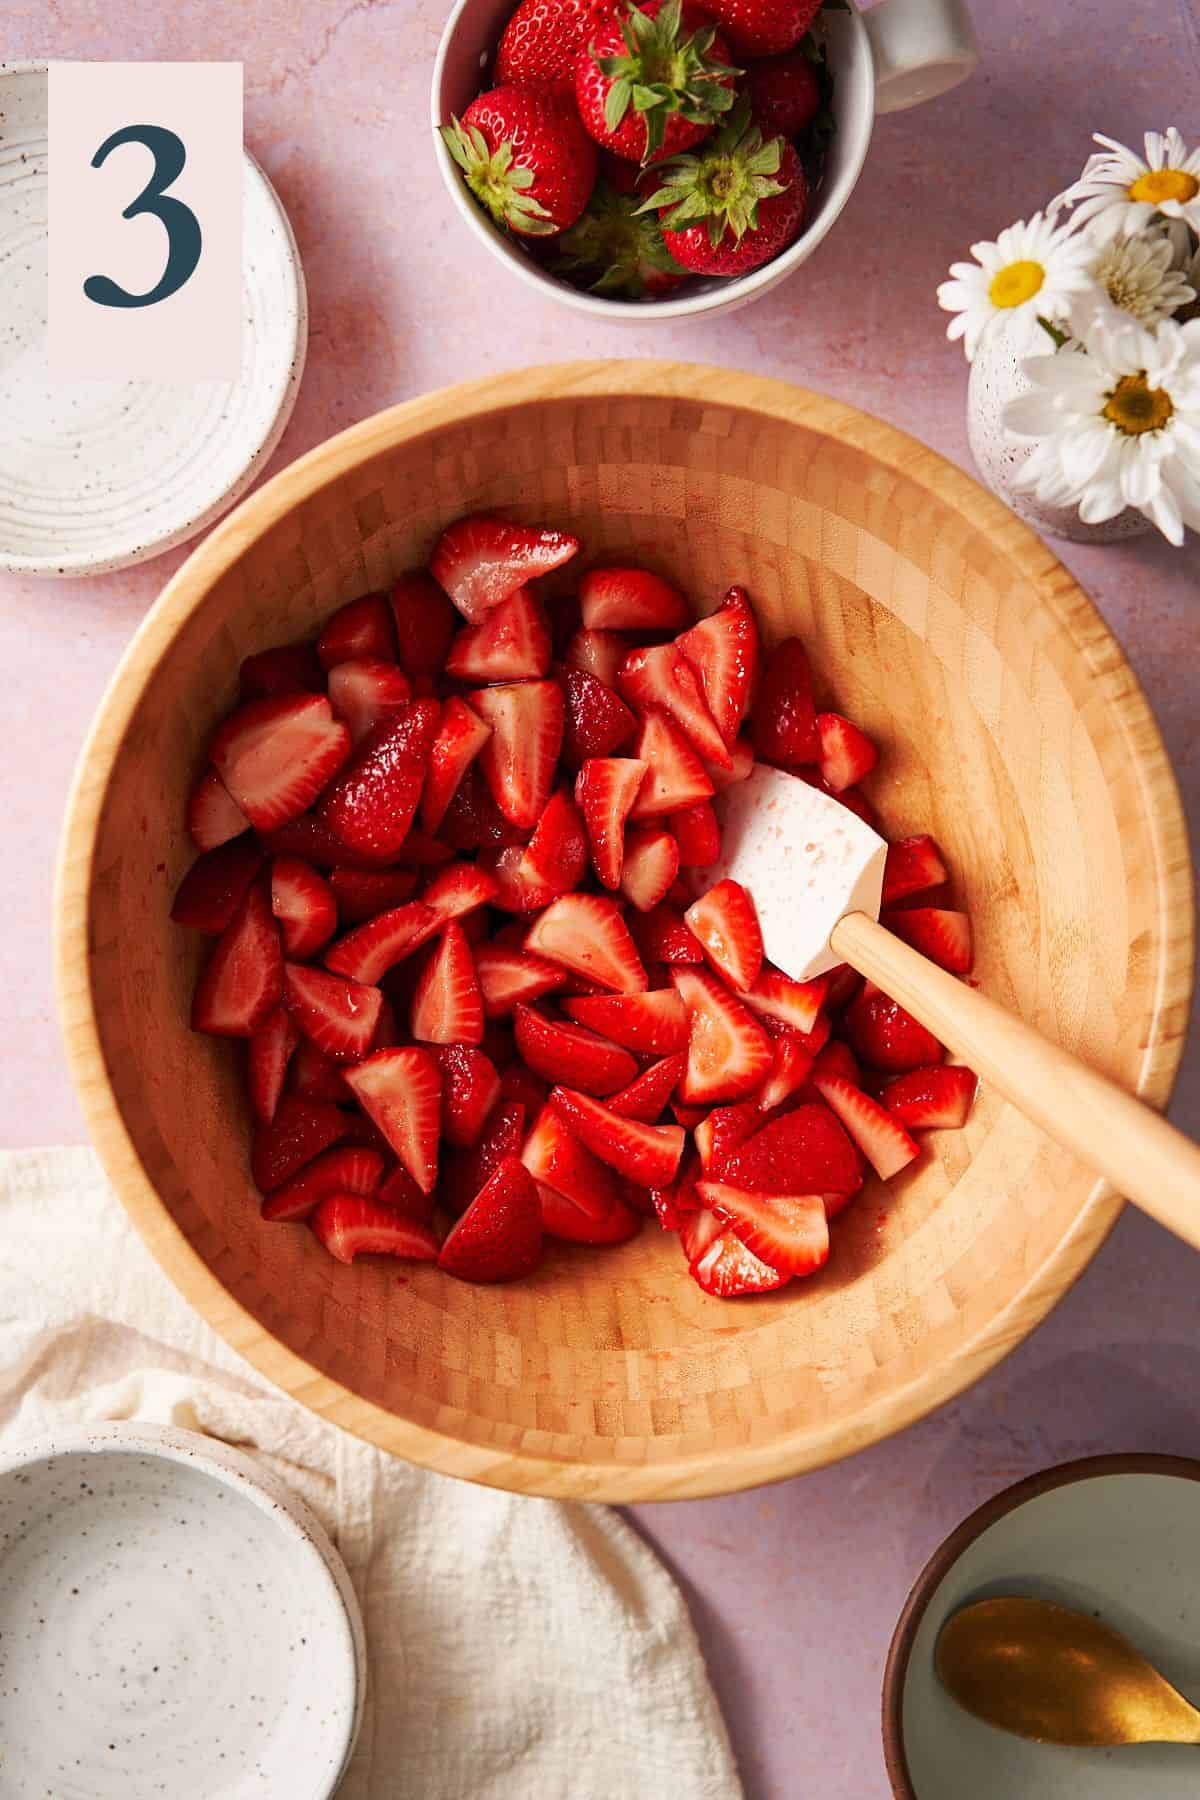 strawberries in a large wooden mixing bowl with a rubber spatula, surrounded by daisies and fresh strawberries. 